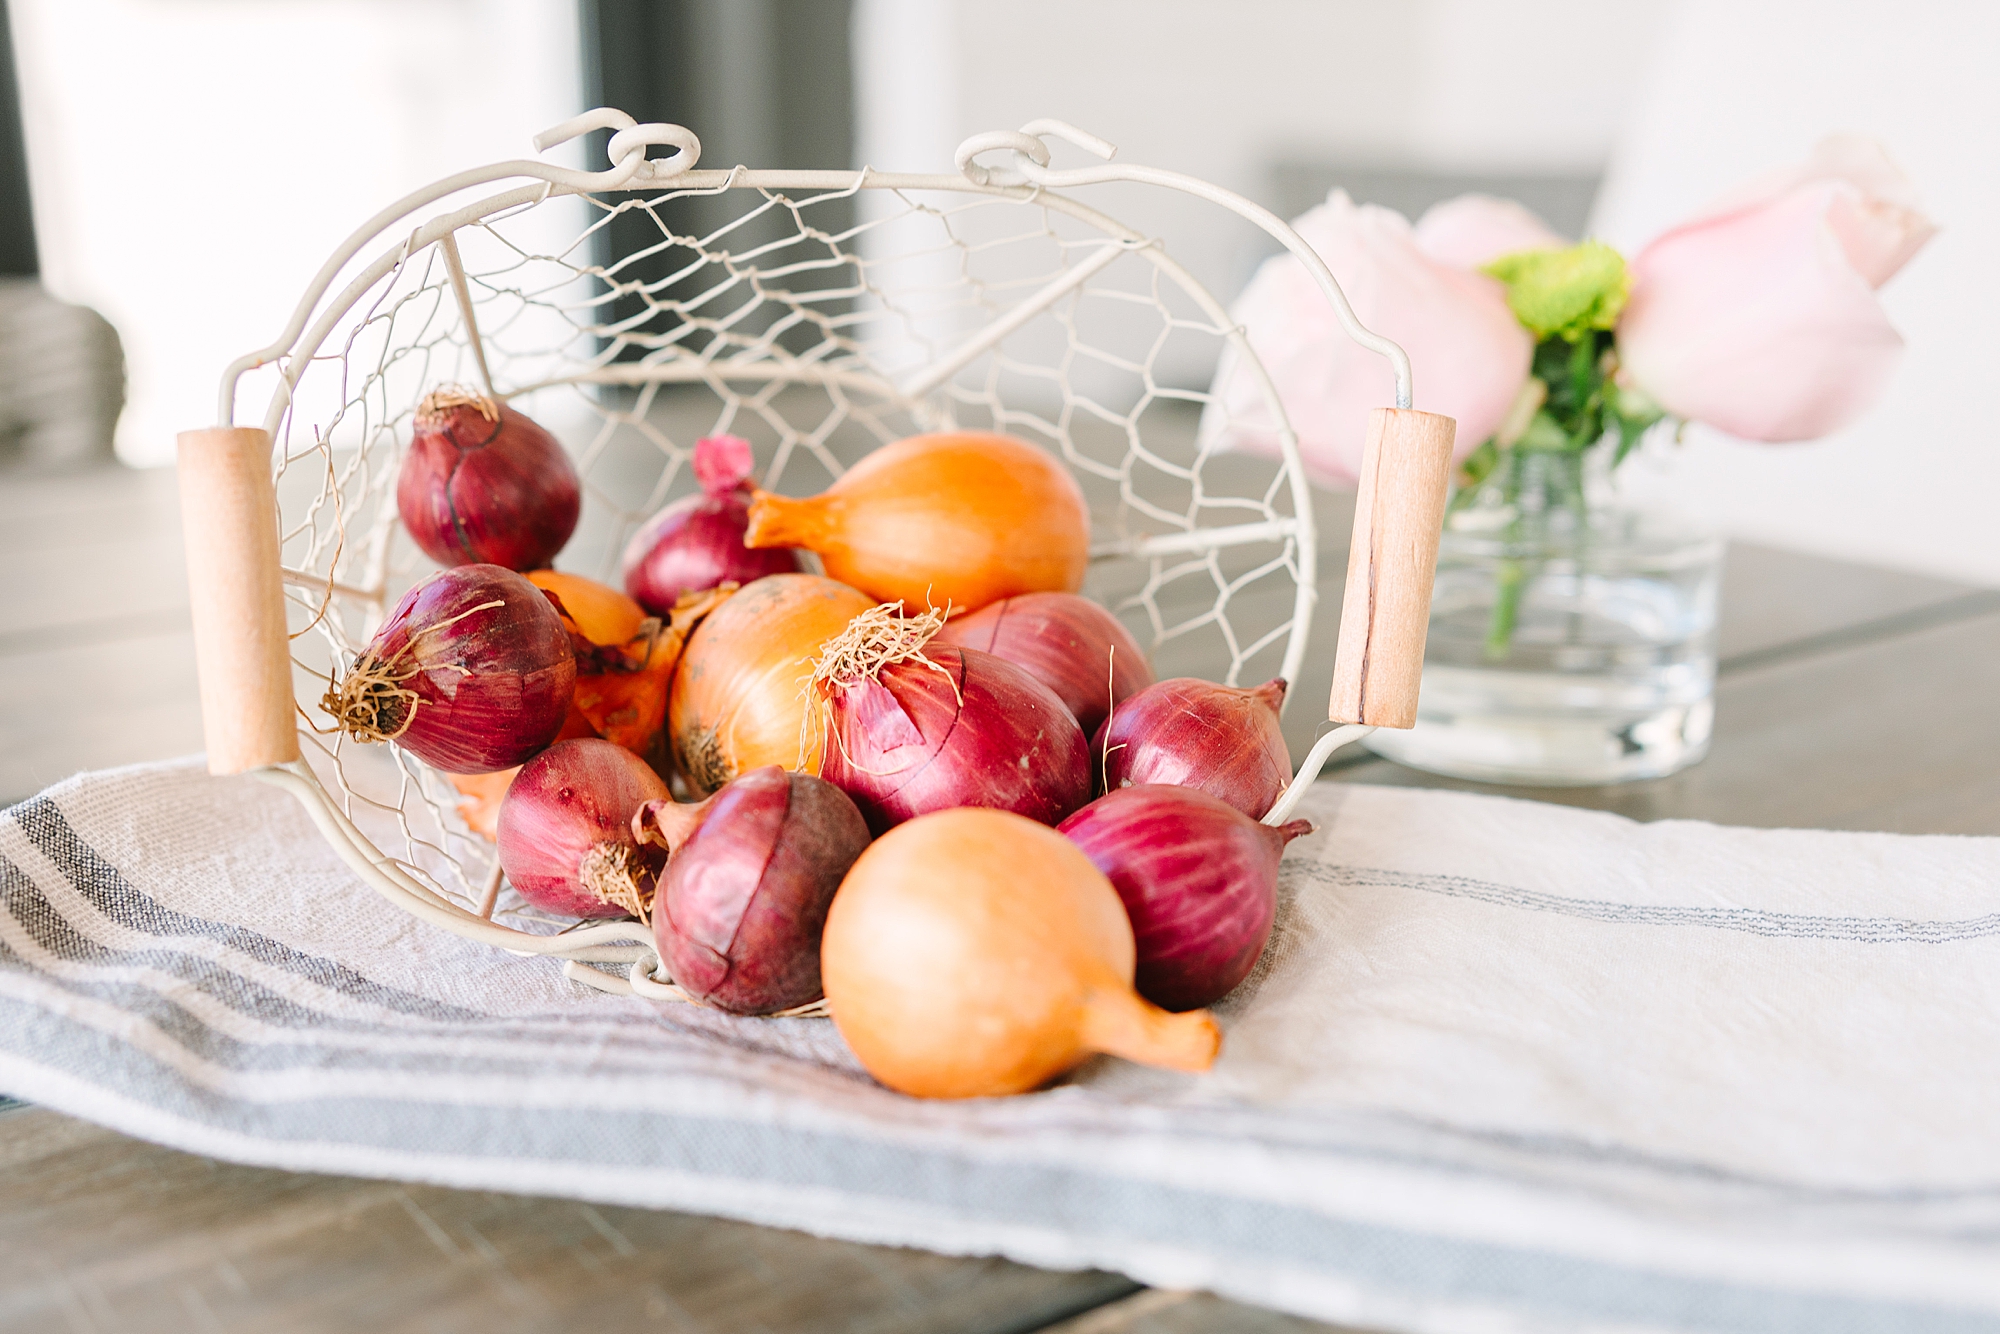 onions spill out of white basket on countertop